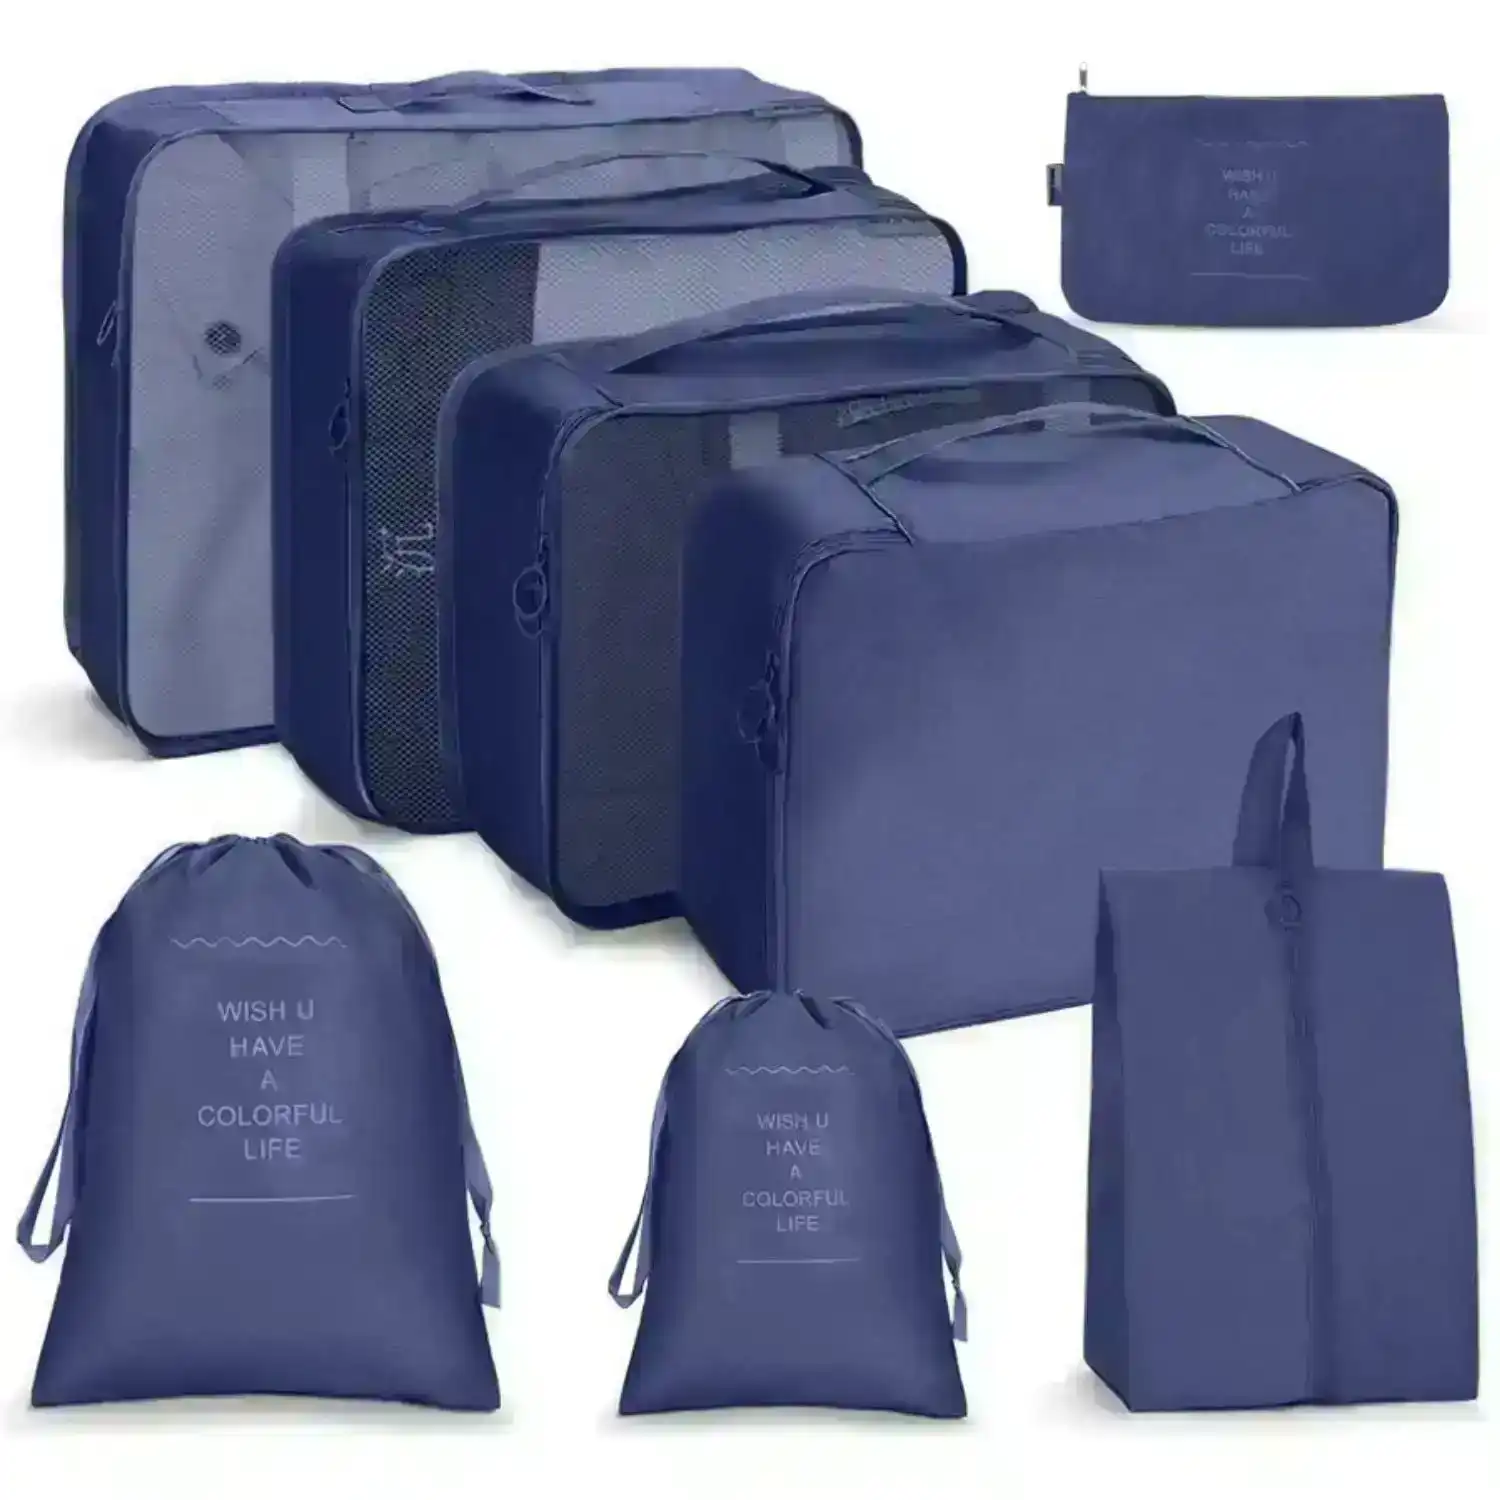 Gominimo 8 Set Packing Cubes Travel Pouches Luggage Organizer Navy Blue